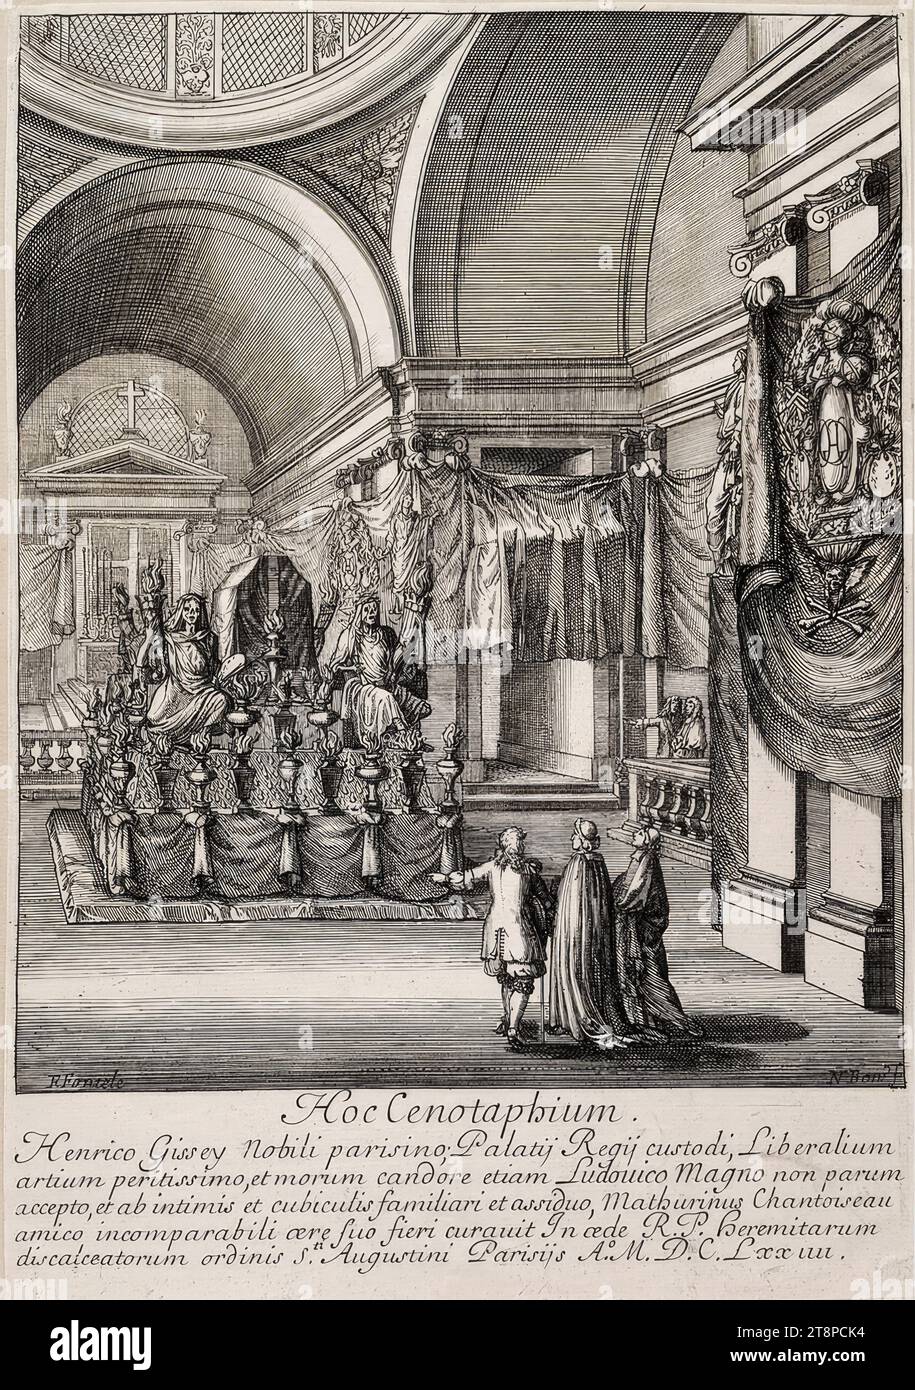 Katafalk und Trauerdekoration für Henri de Gissey in der Augustiner-Kirche Notre-Dame-des-Victoires in Paris 1674, (1674), Druckgraphik, Kupferstich auf Papier, Blatt: 33 × 23 cm, 'Hoc Cenotaphium. | Henry Gissey, a noble Parisian; Guard the Royal Palace, Liberalium | very skilled in the arts, and in the brightness of his manners, not a little to Louis the Great having received it, and from the intimates and rooms of the familiar and constant Stock Photo